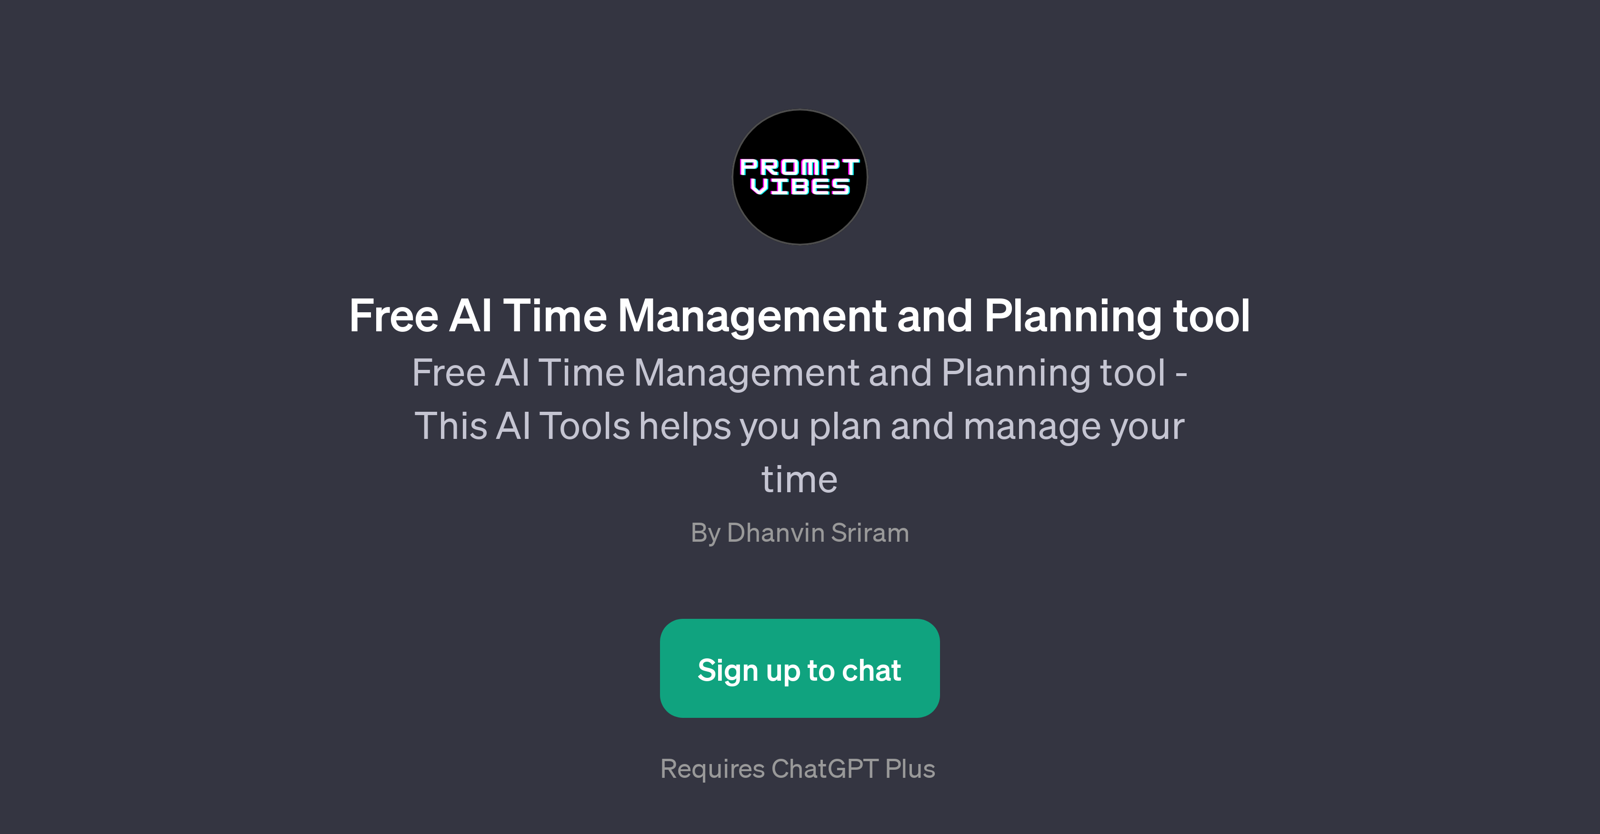 Free AI Time Management and Planning Tool website